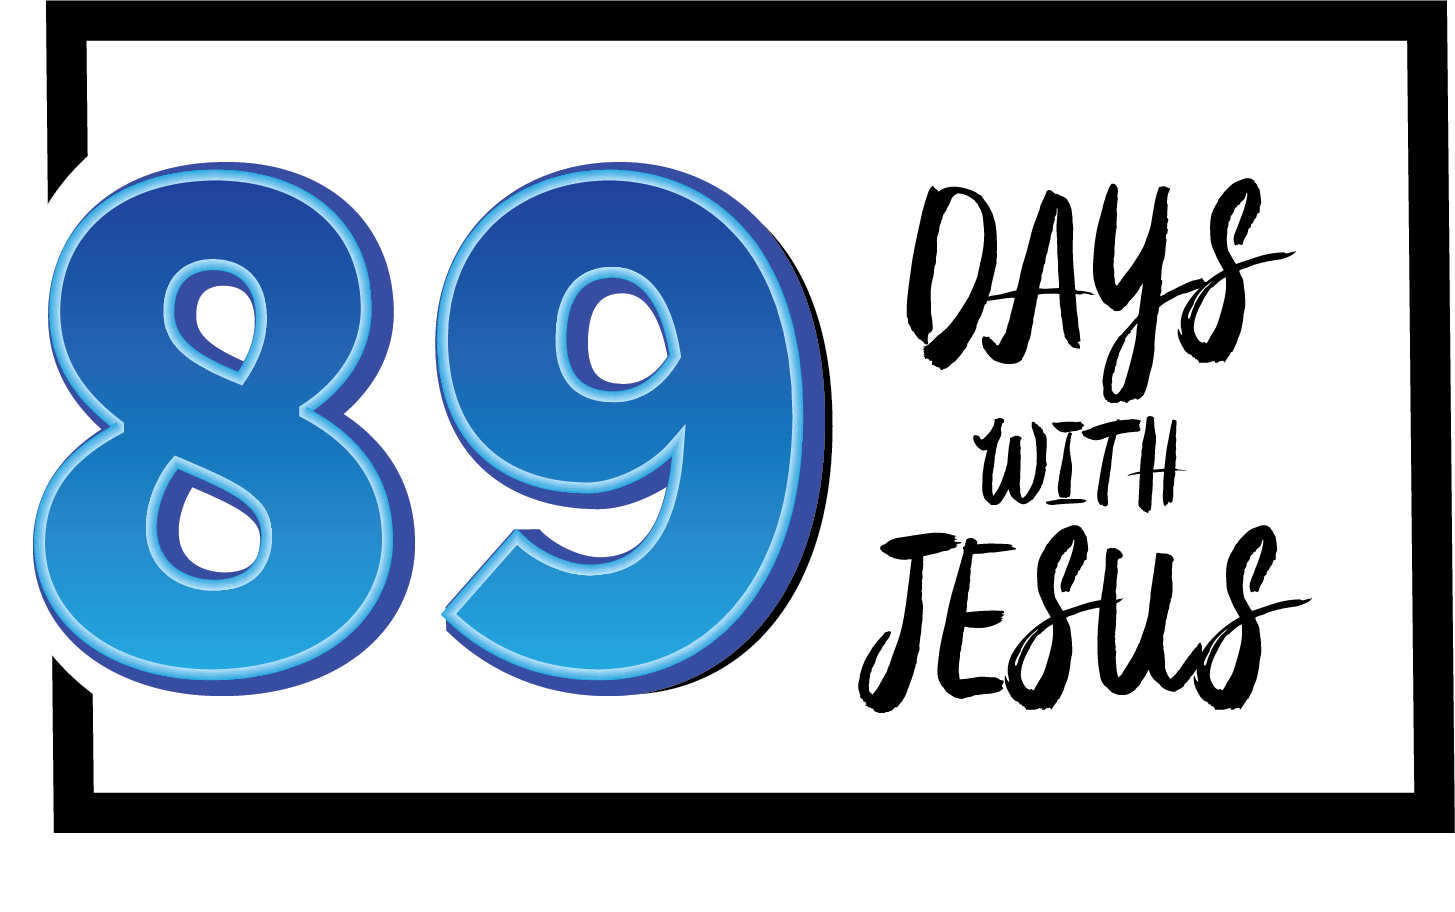 '89 Days With Jesus' Daily Bible Reading Plan
